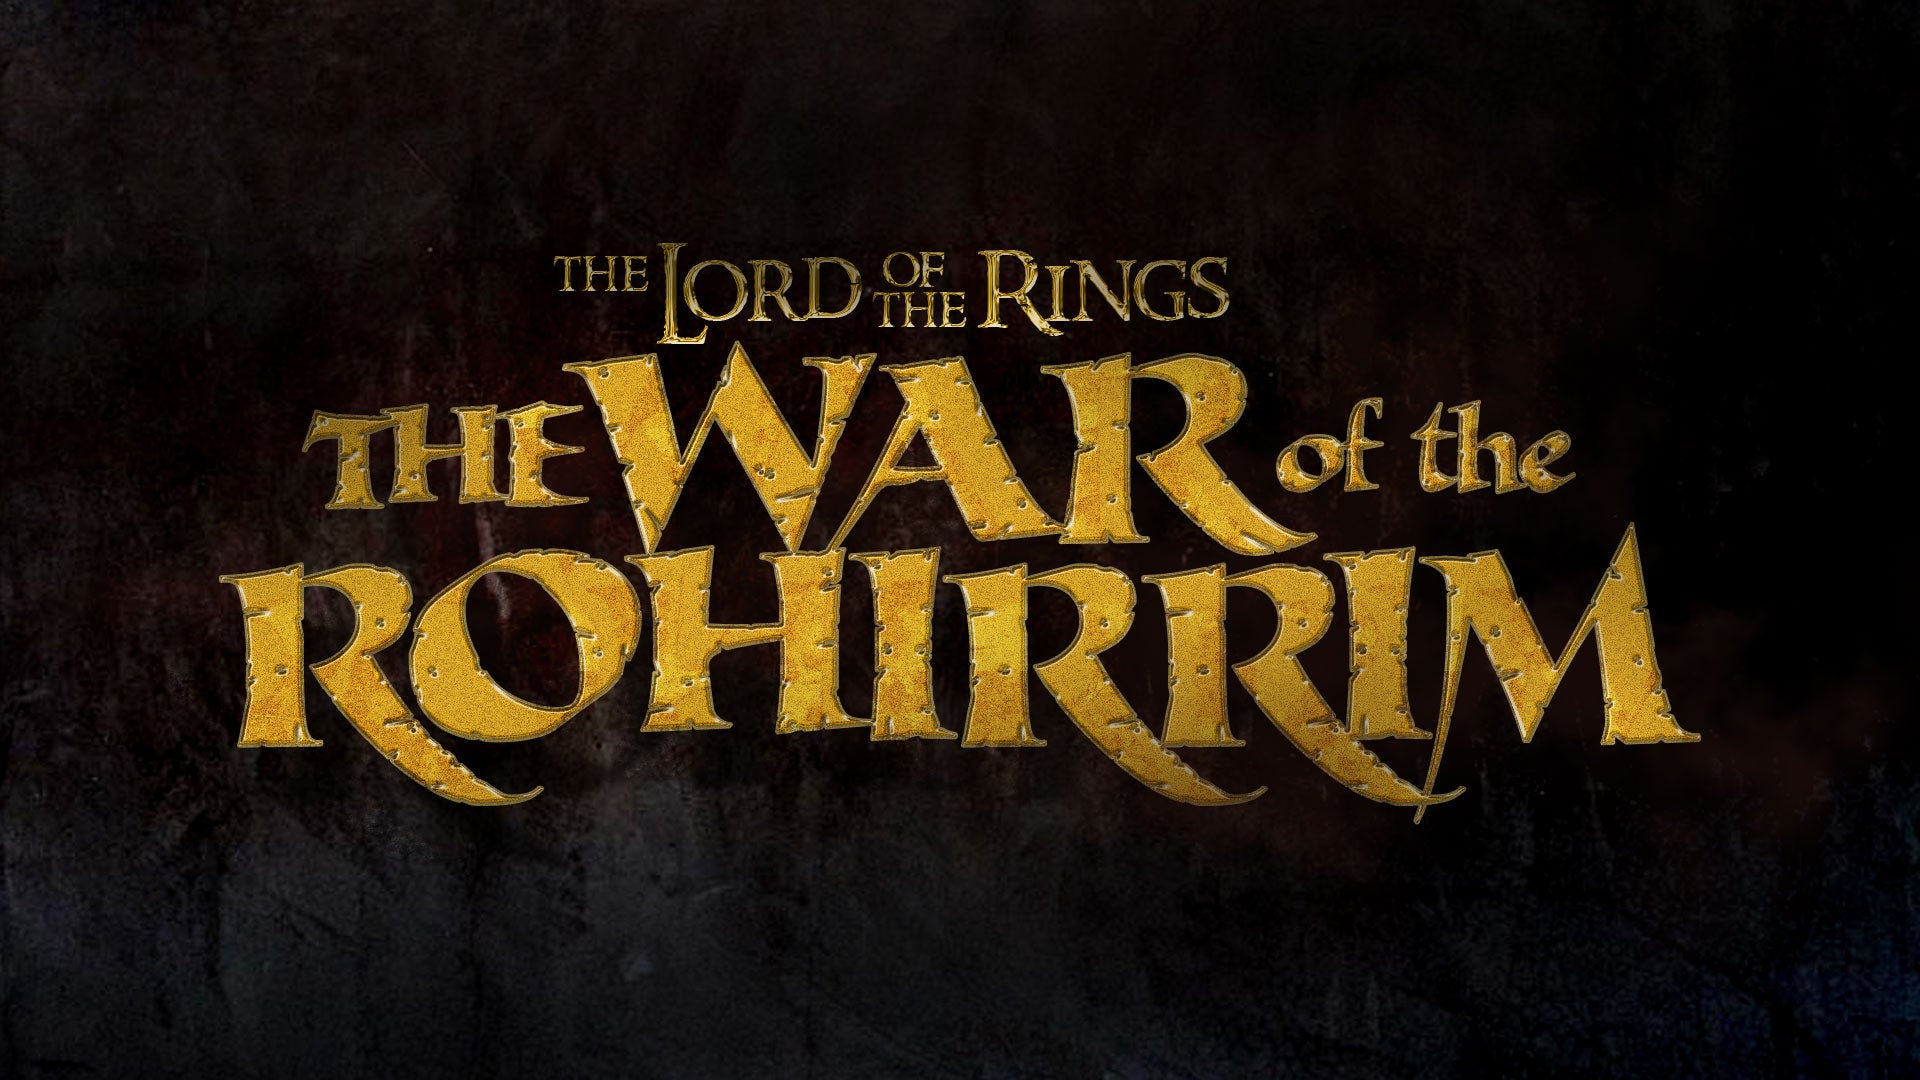 The Lord of the Rings: The War of the Rohirrim title card. (Image: New Line Cinema/Warner Bros. Animation)